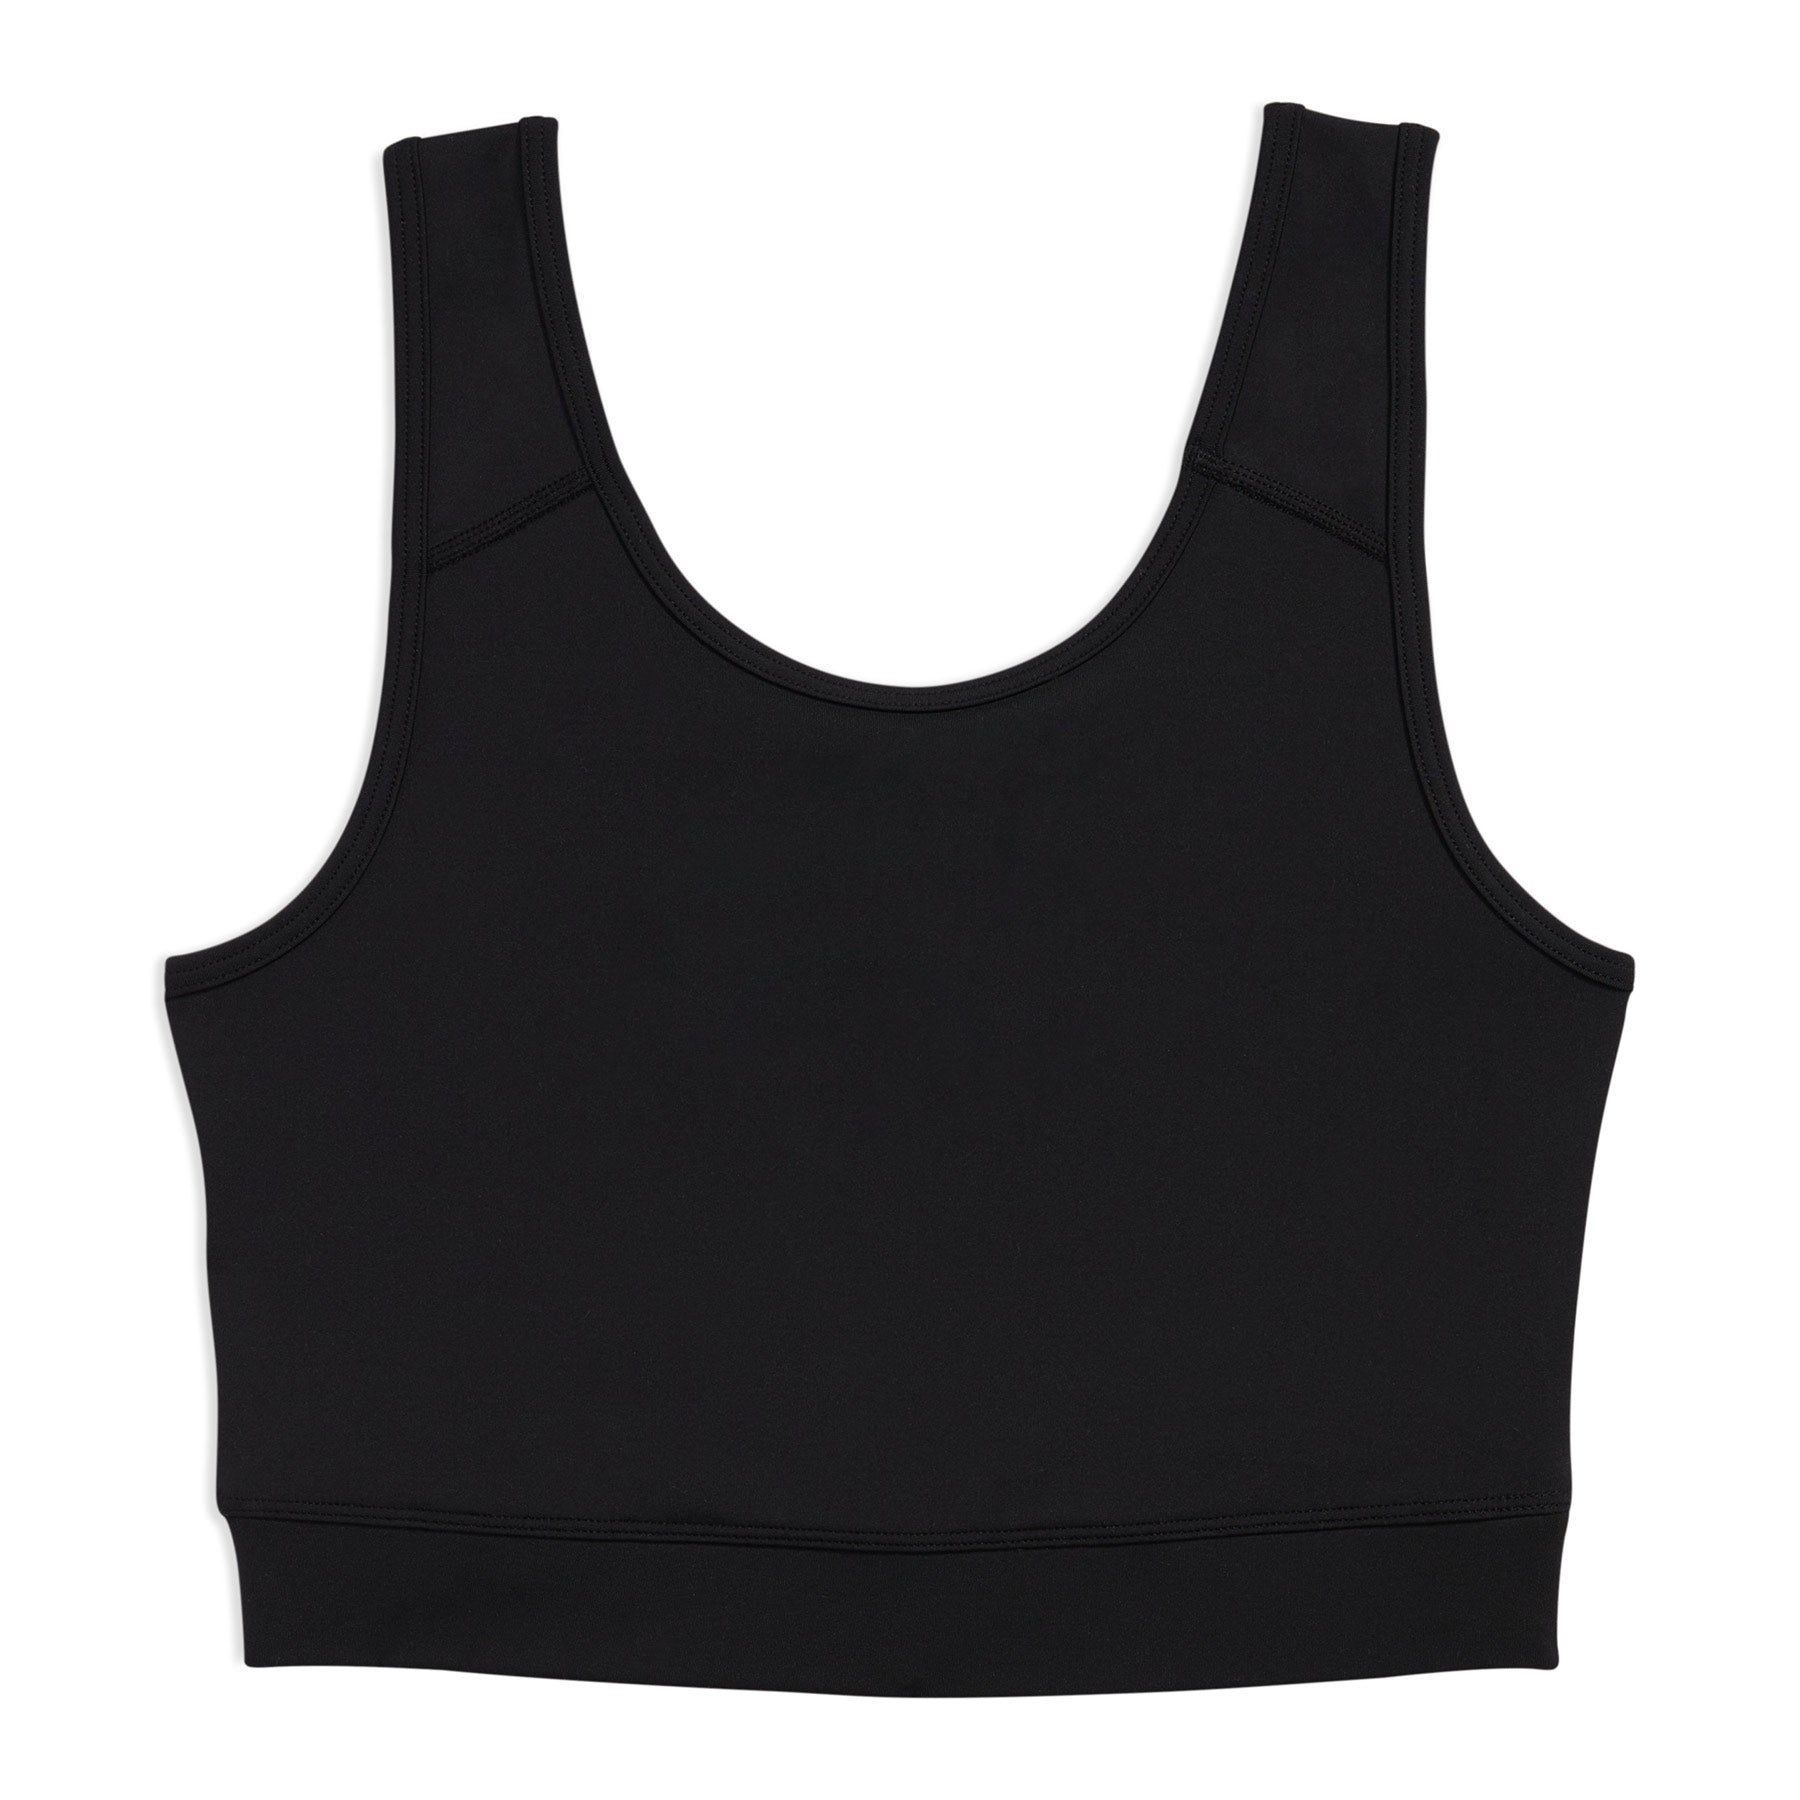 Seamless Trans Black Summer Vest For Lesbian Tomboyx Underwear And Tomboy  Bra Flat Breast Binder With Stylish Design From Elseeing, $21.17